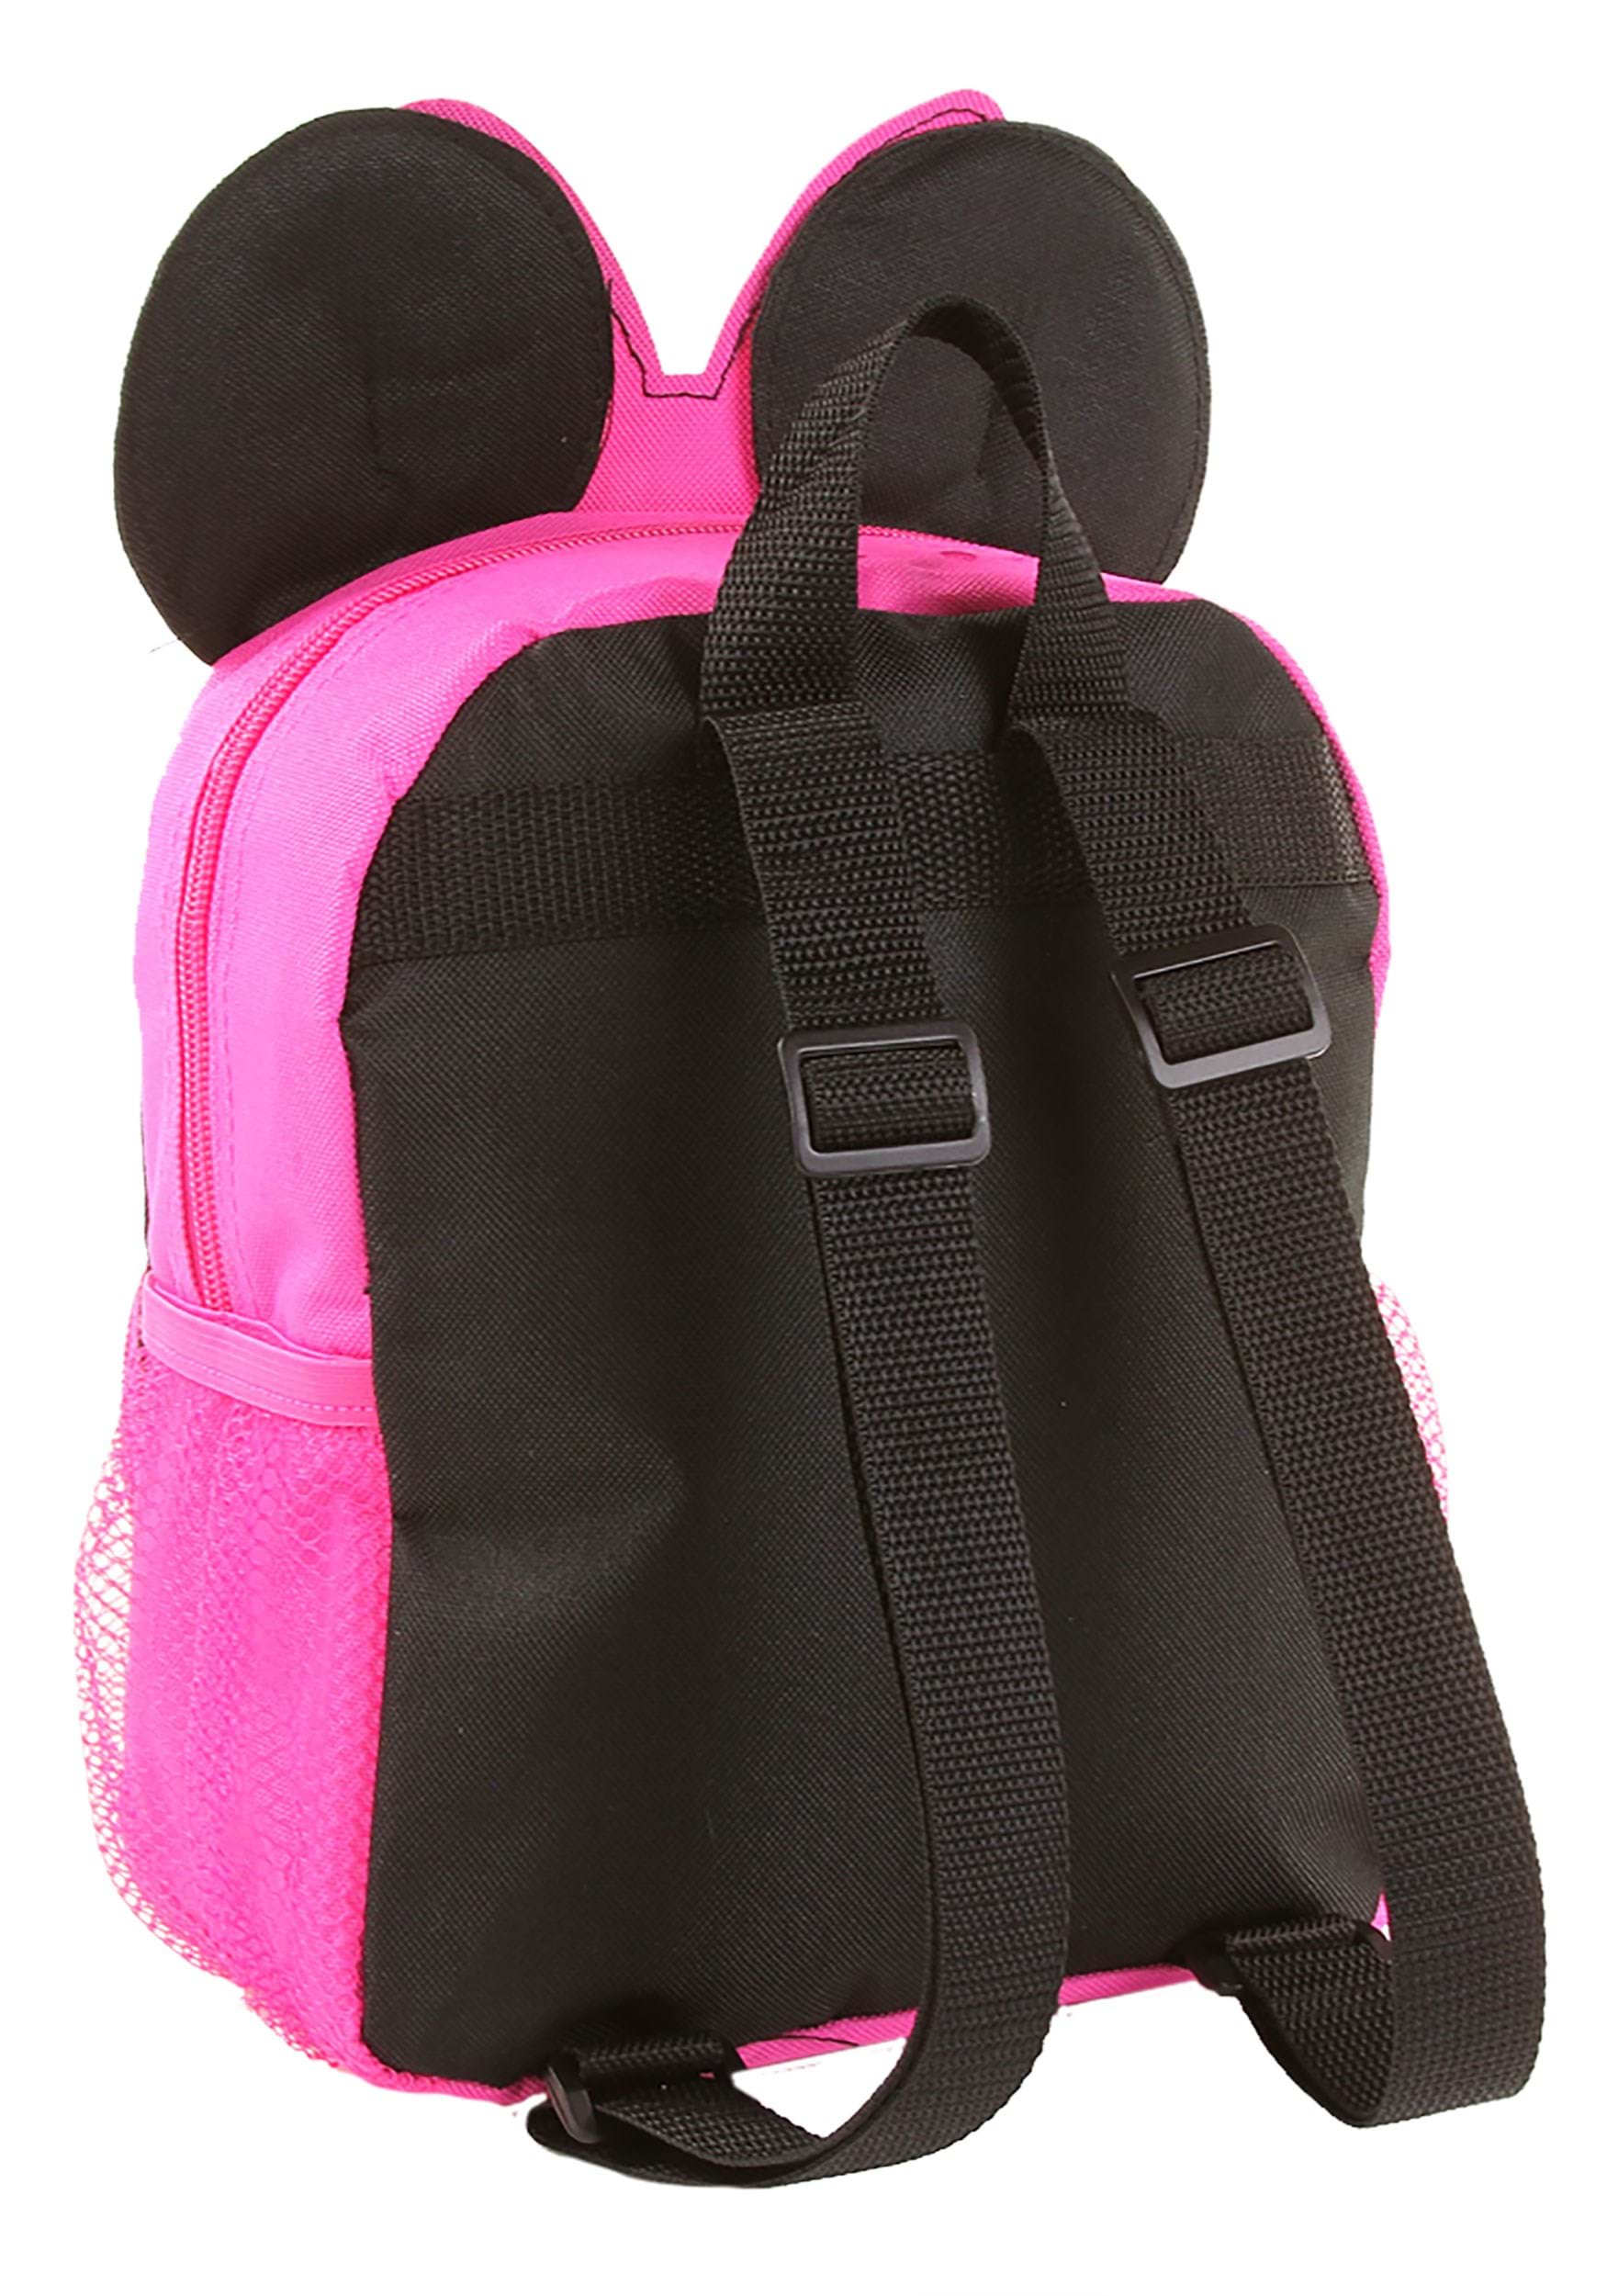 10" Minnie Mouse Big Face Mini Backpack